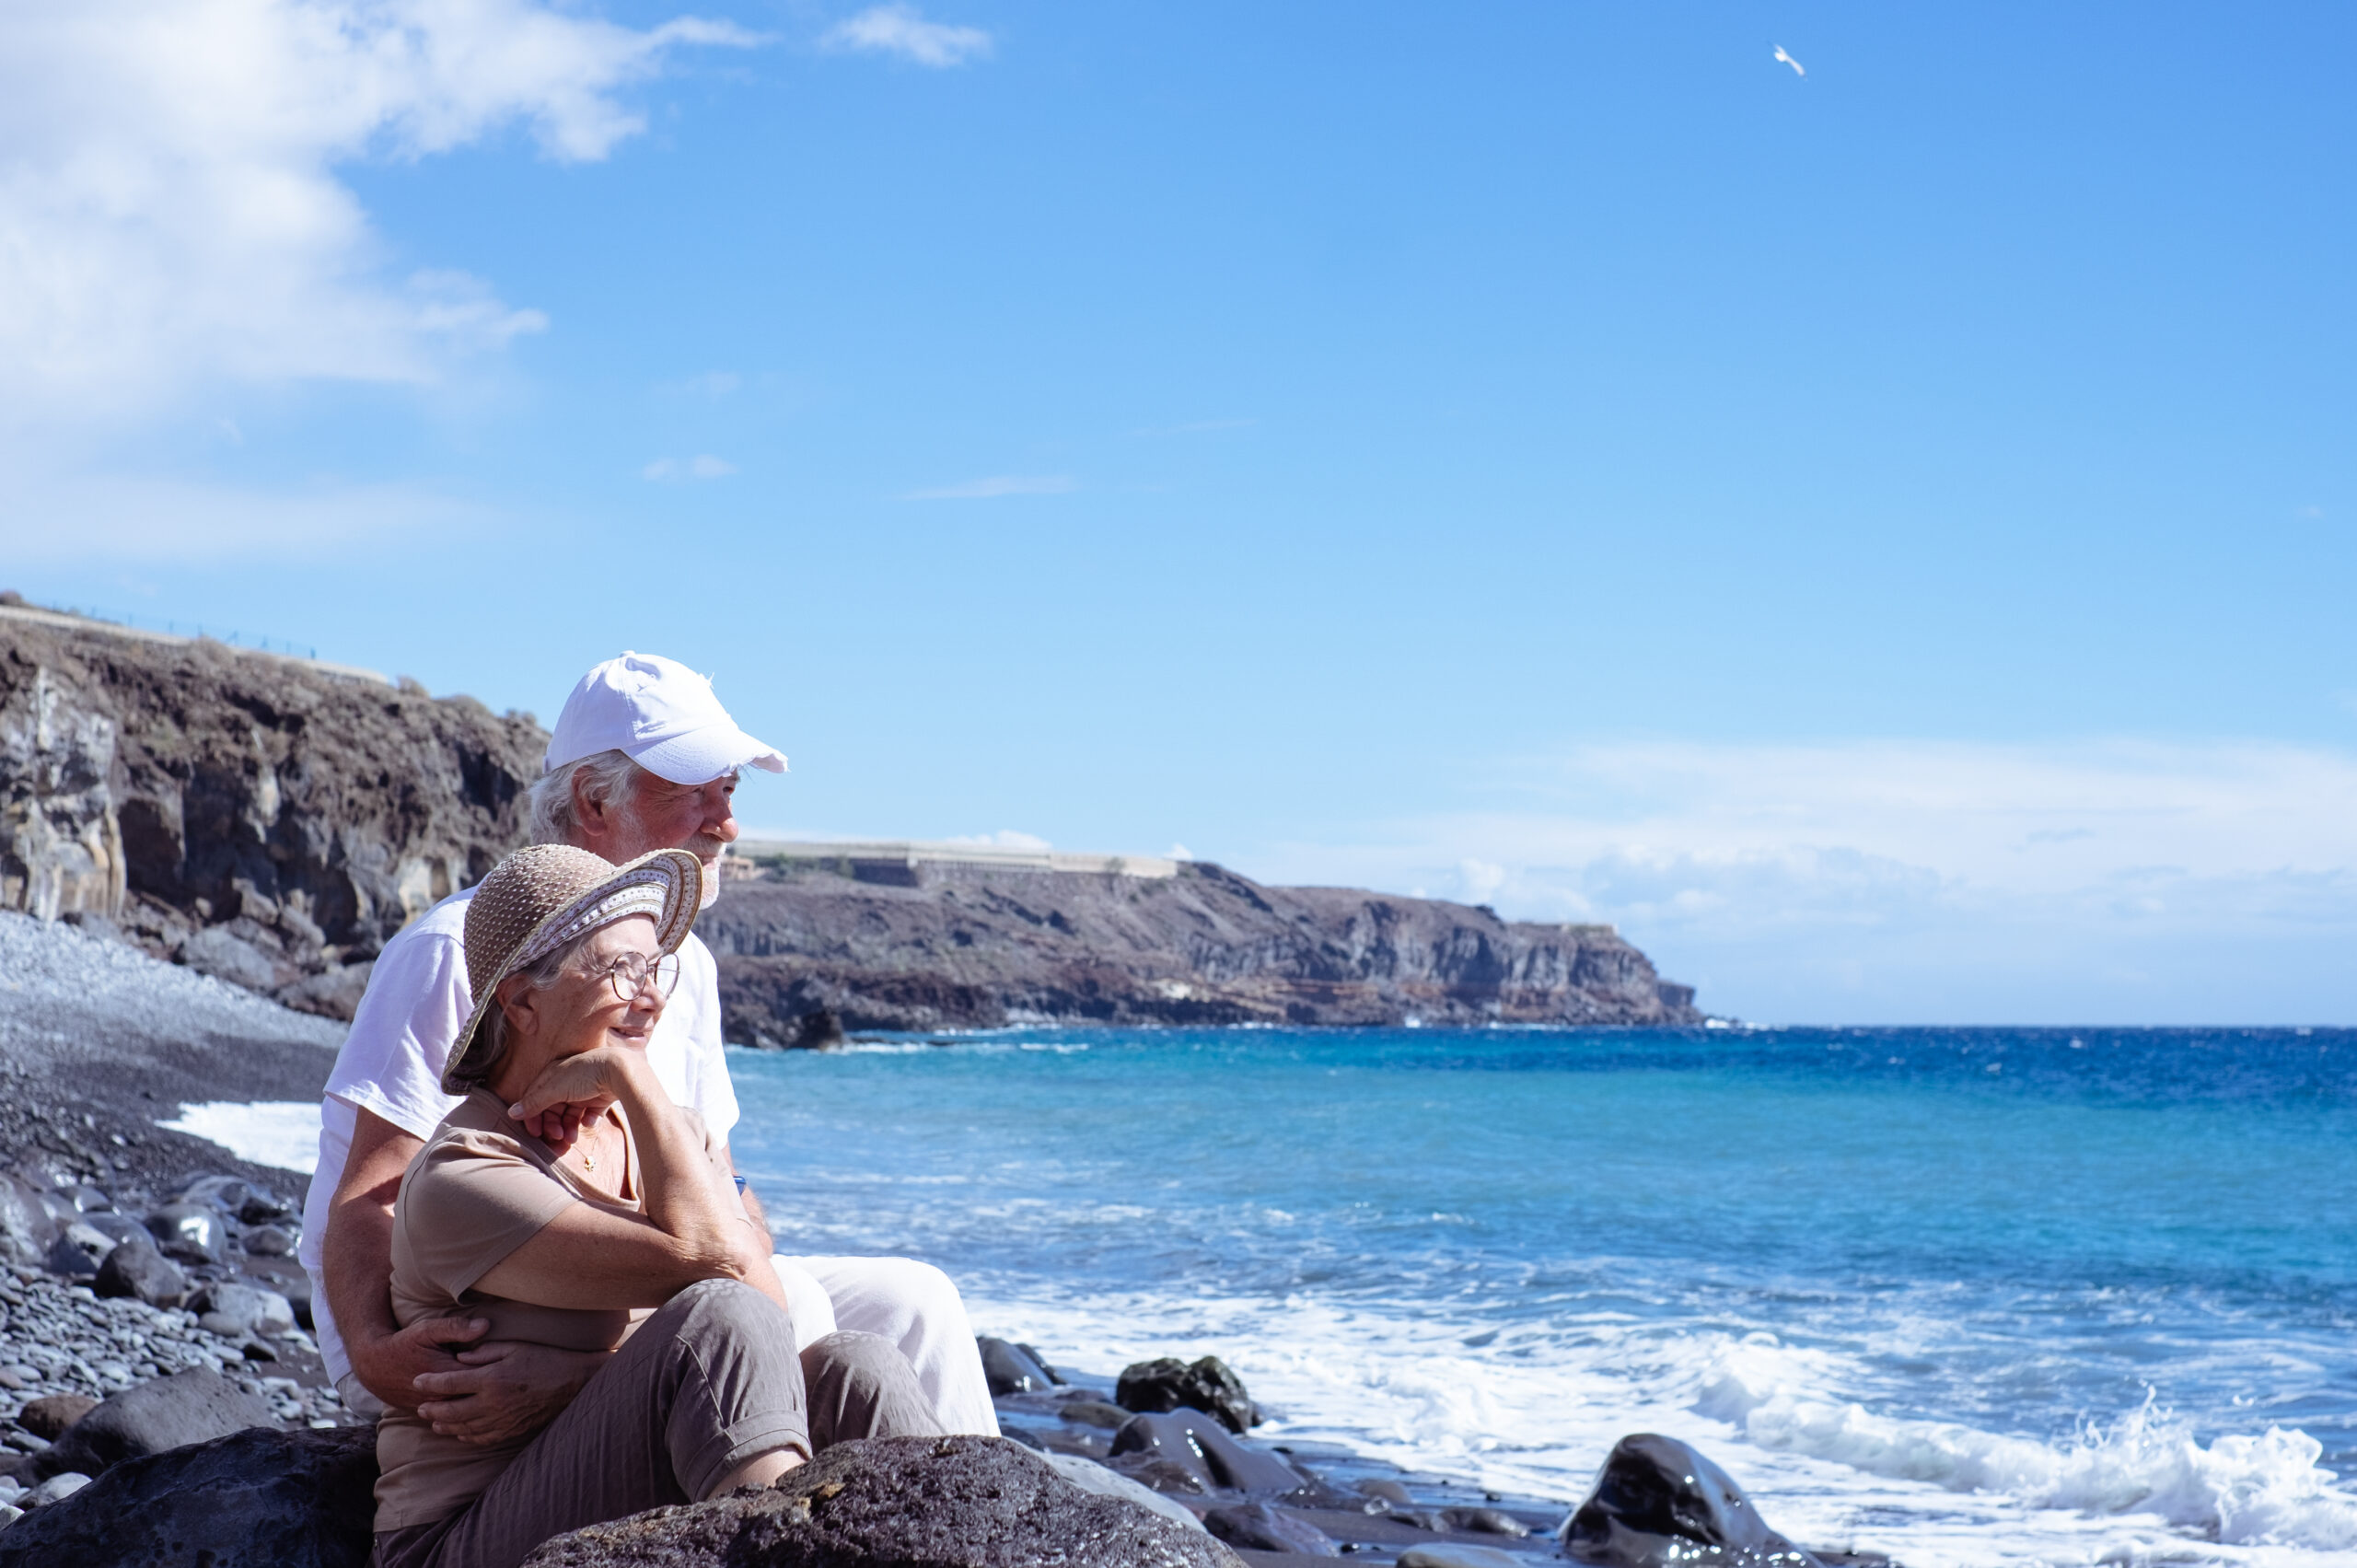 Senior couple sitting on rocks by the ocean, enjoying the view.